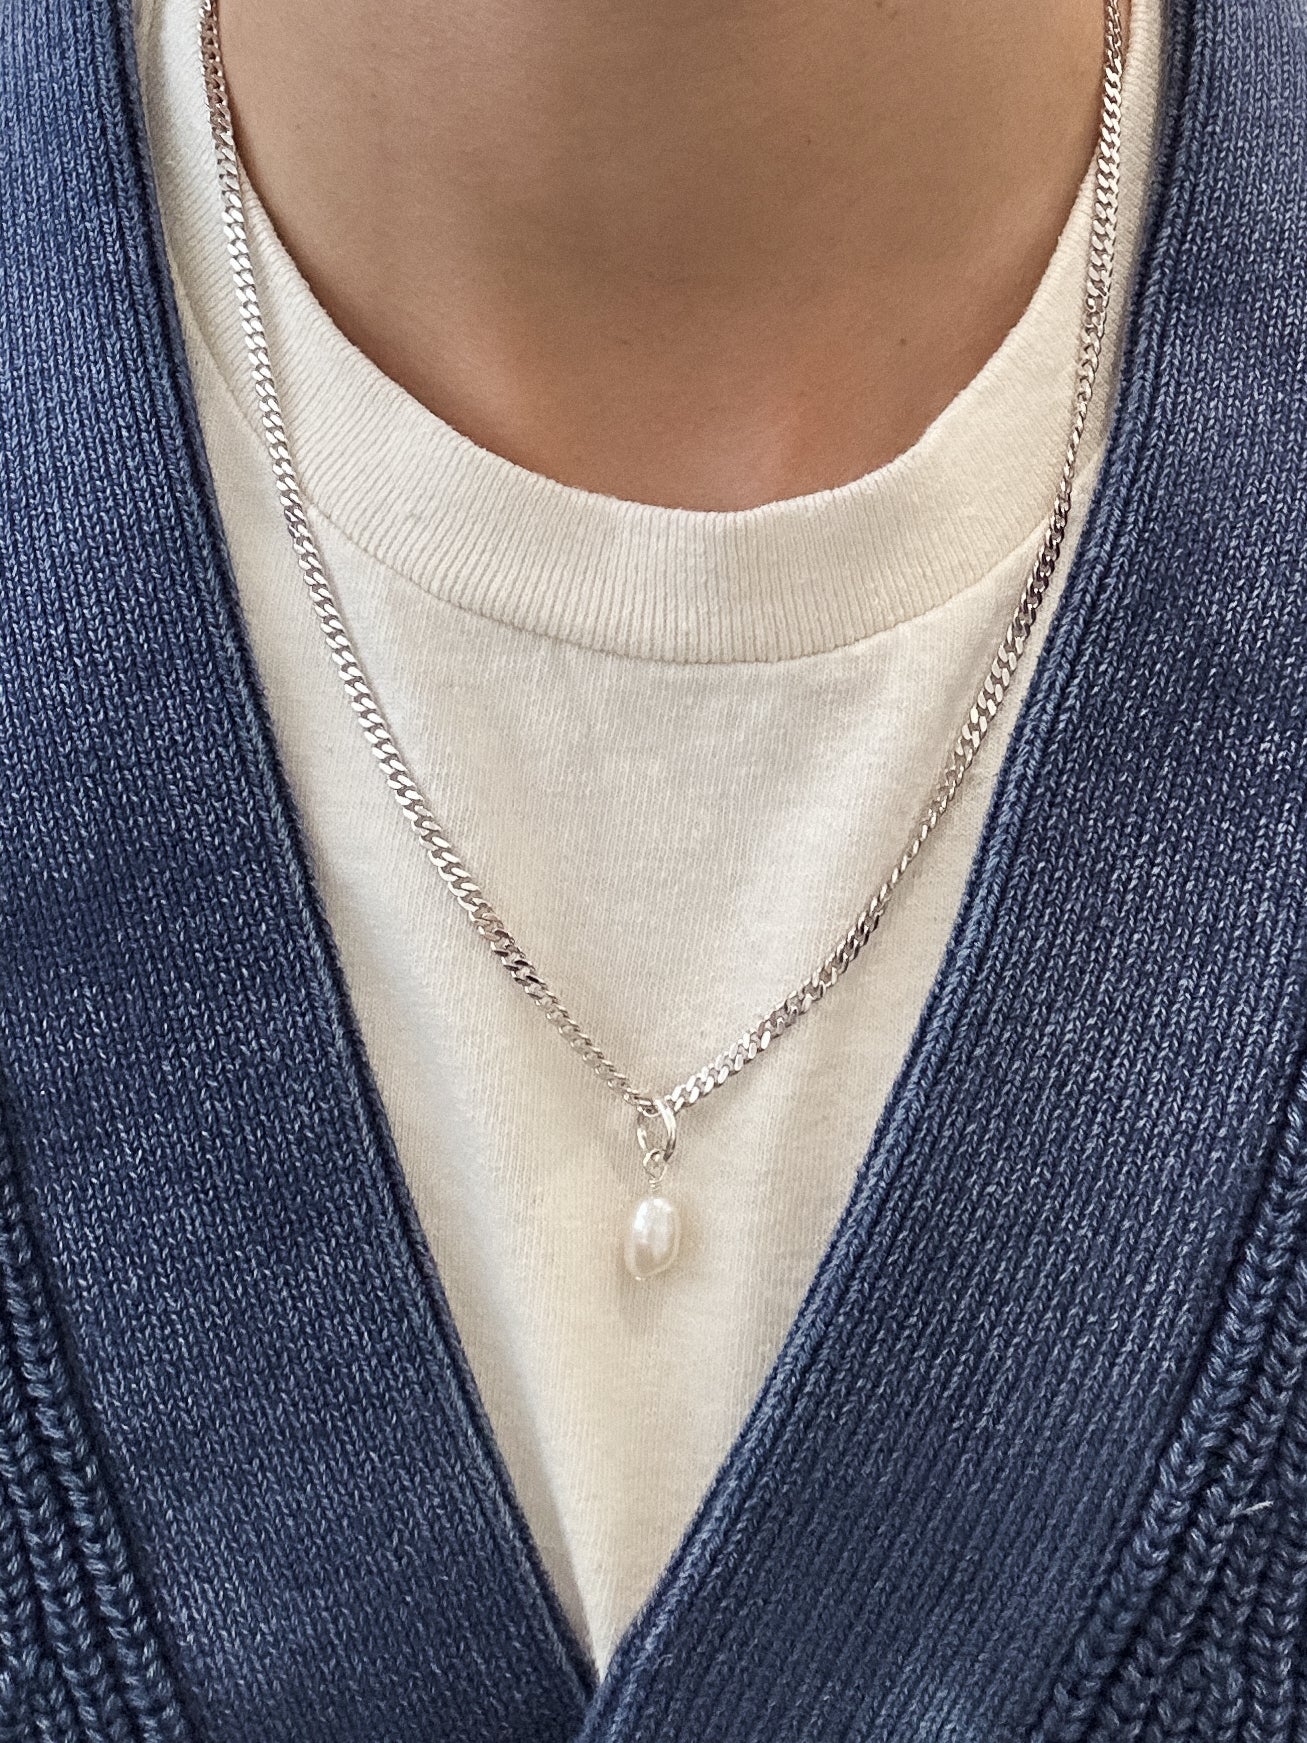 PEARL DROPLET NECKLACE